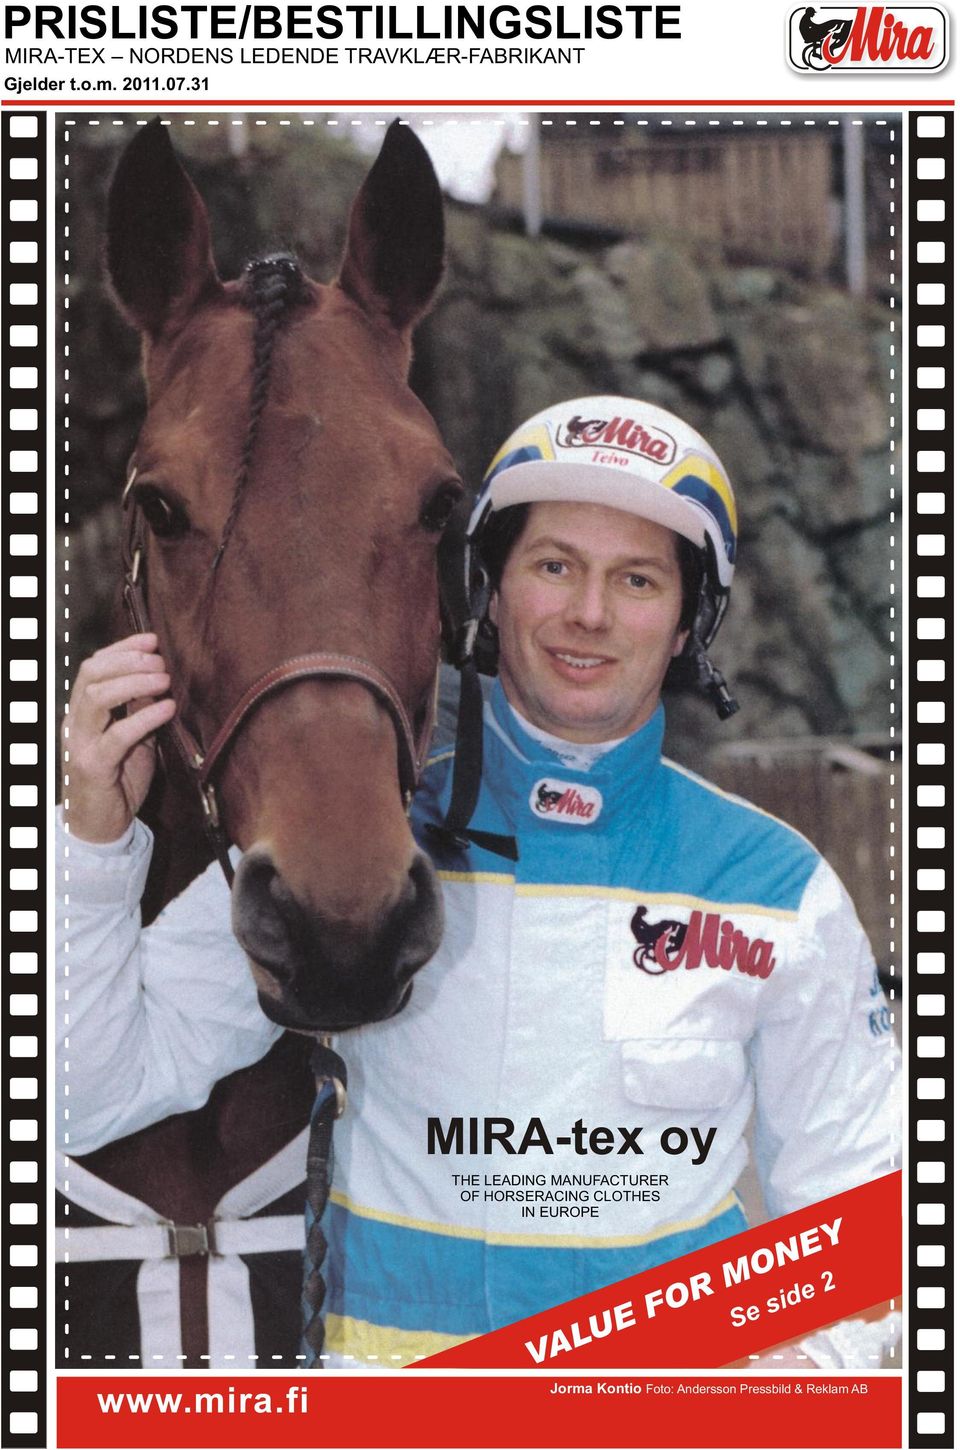 fi MIRA-tex oy THE LEADING MANUFACTURER OF HORSERACING CLOTHES